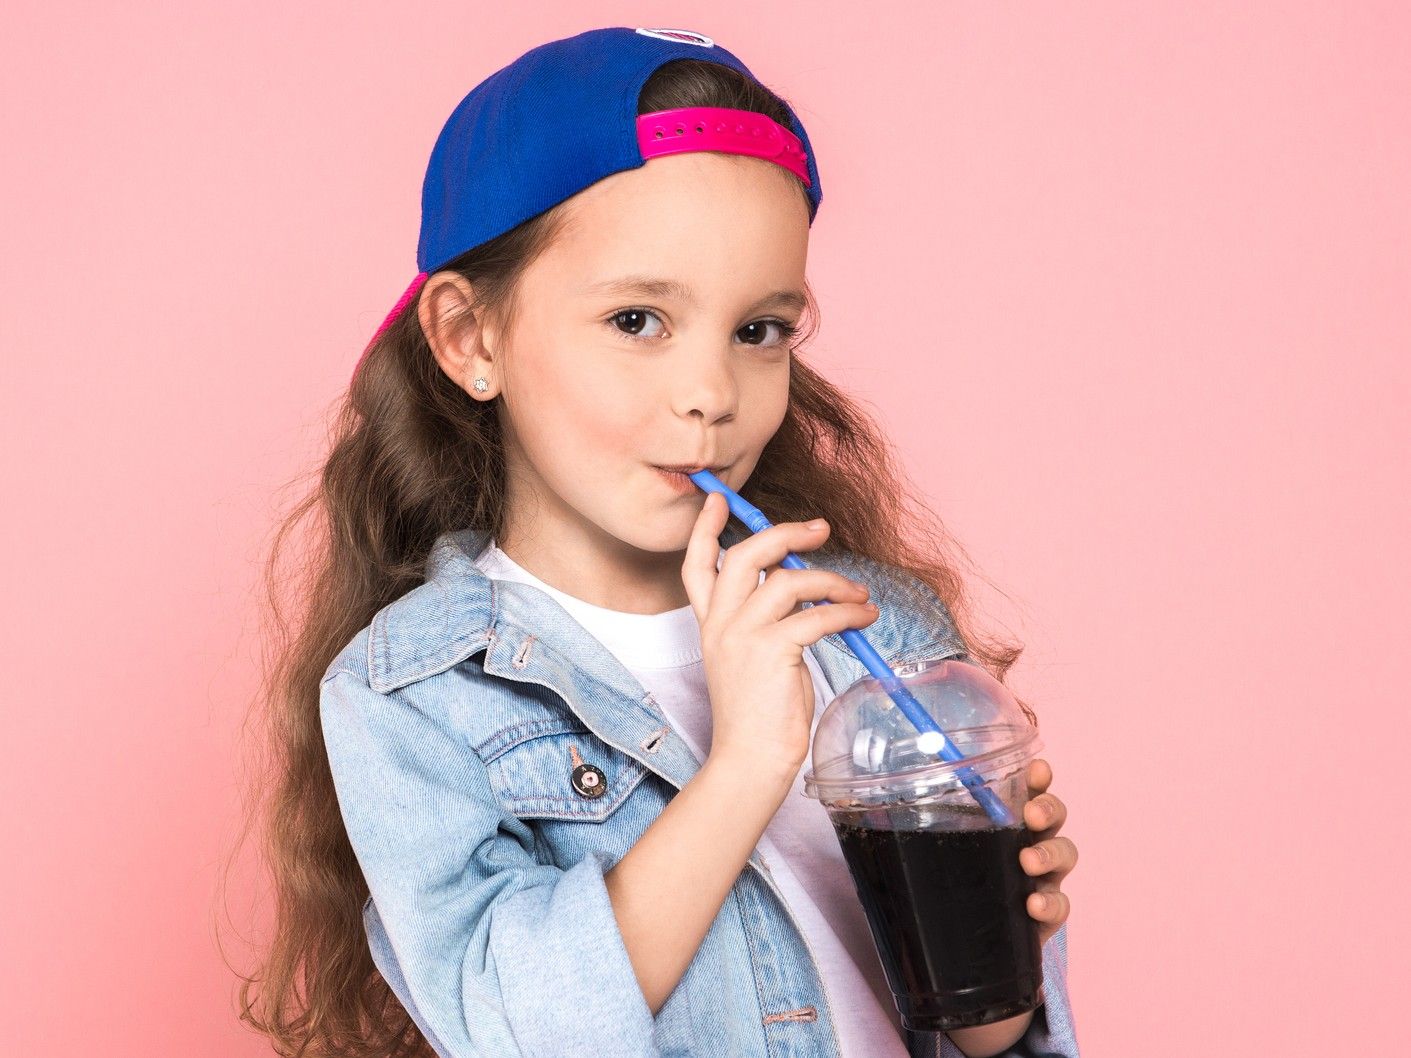 Kids are getting exposed to unhealthy foods via popular YouTube stars, a study suggests.